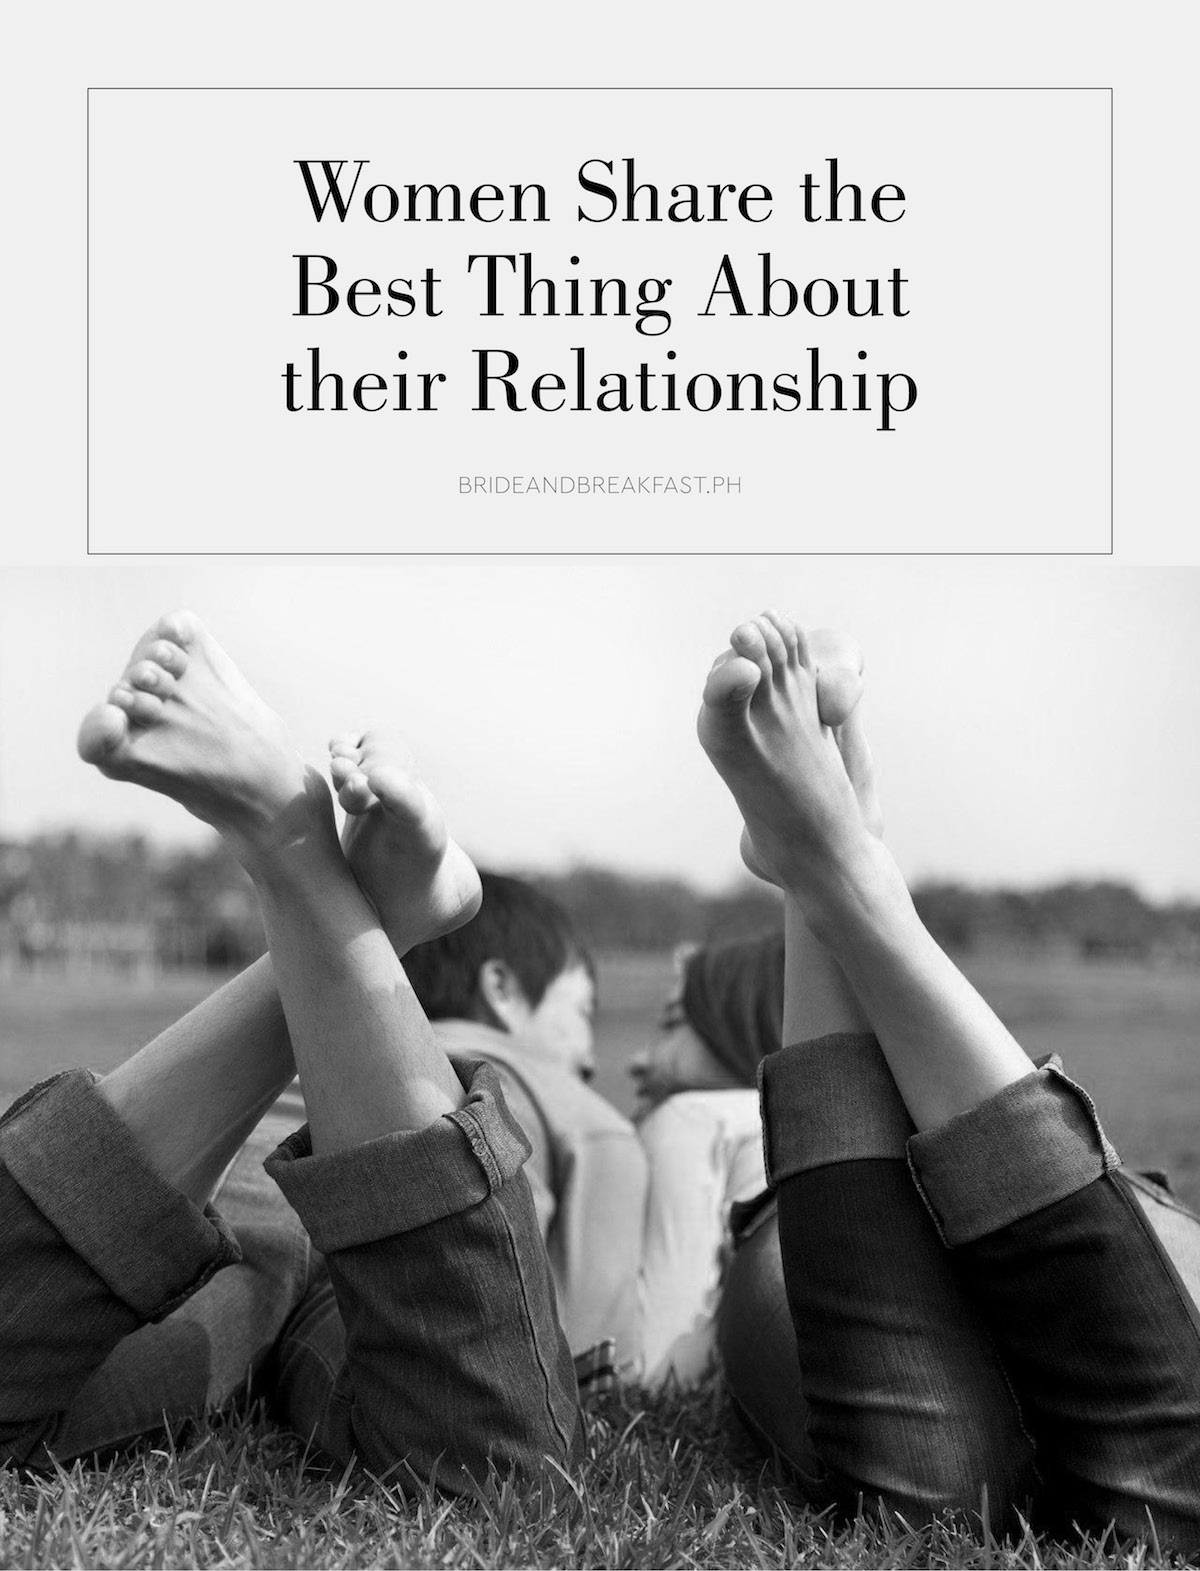 Women Share the Best Thing About Their Relationship